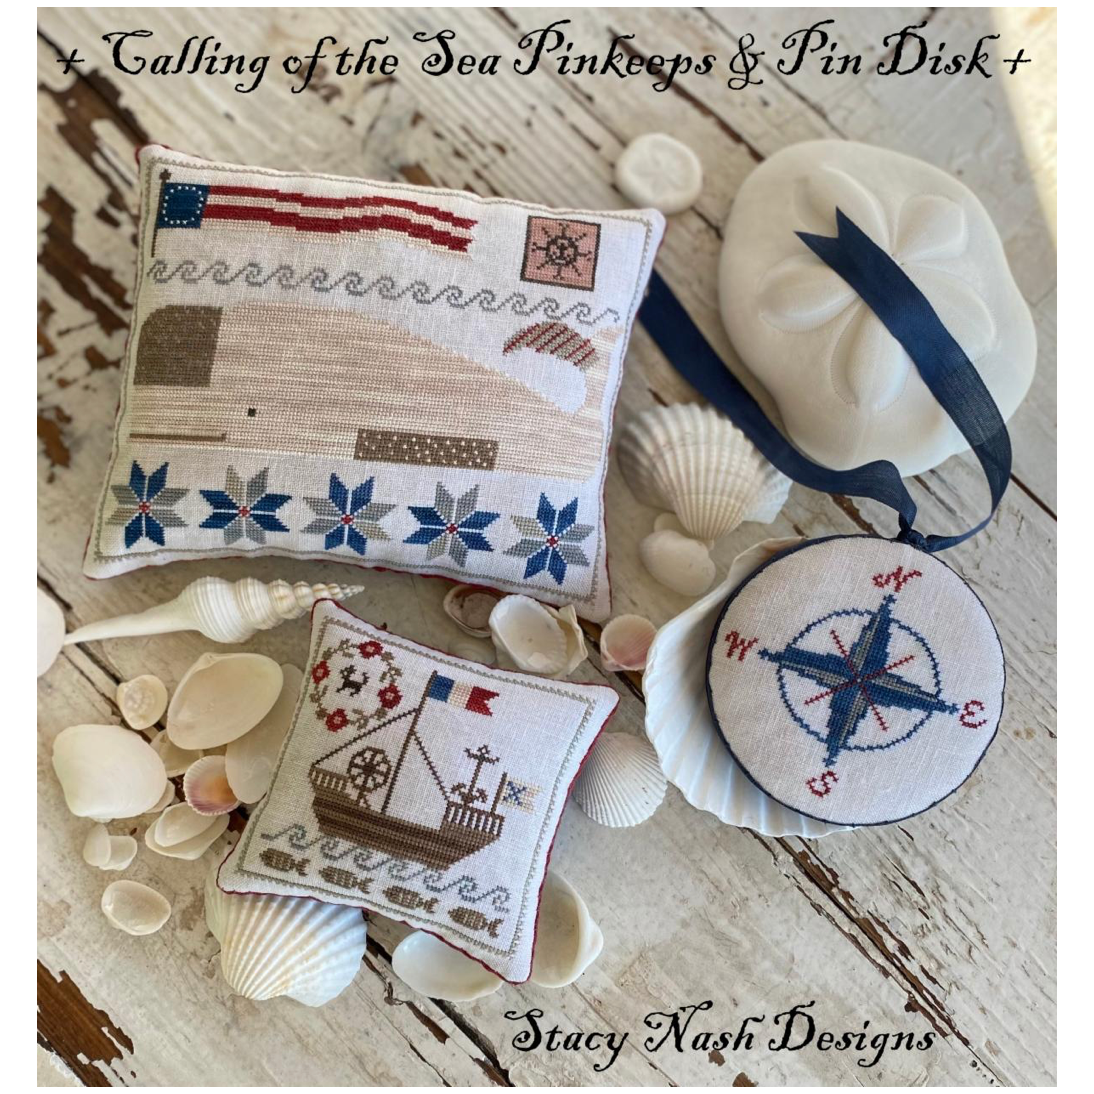 Stacy Nash Designs | Calling of the Sea Pinkeeps & Pin Disk